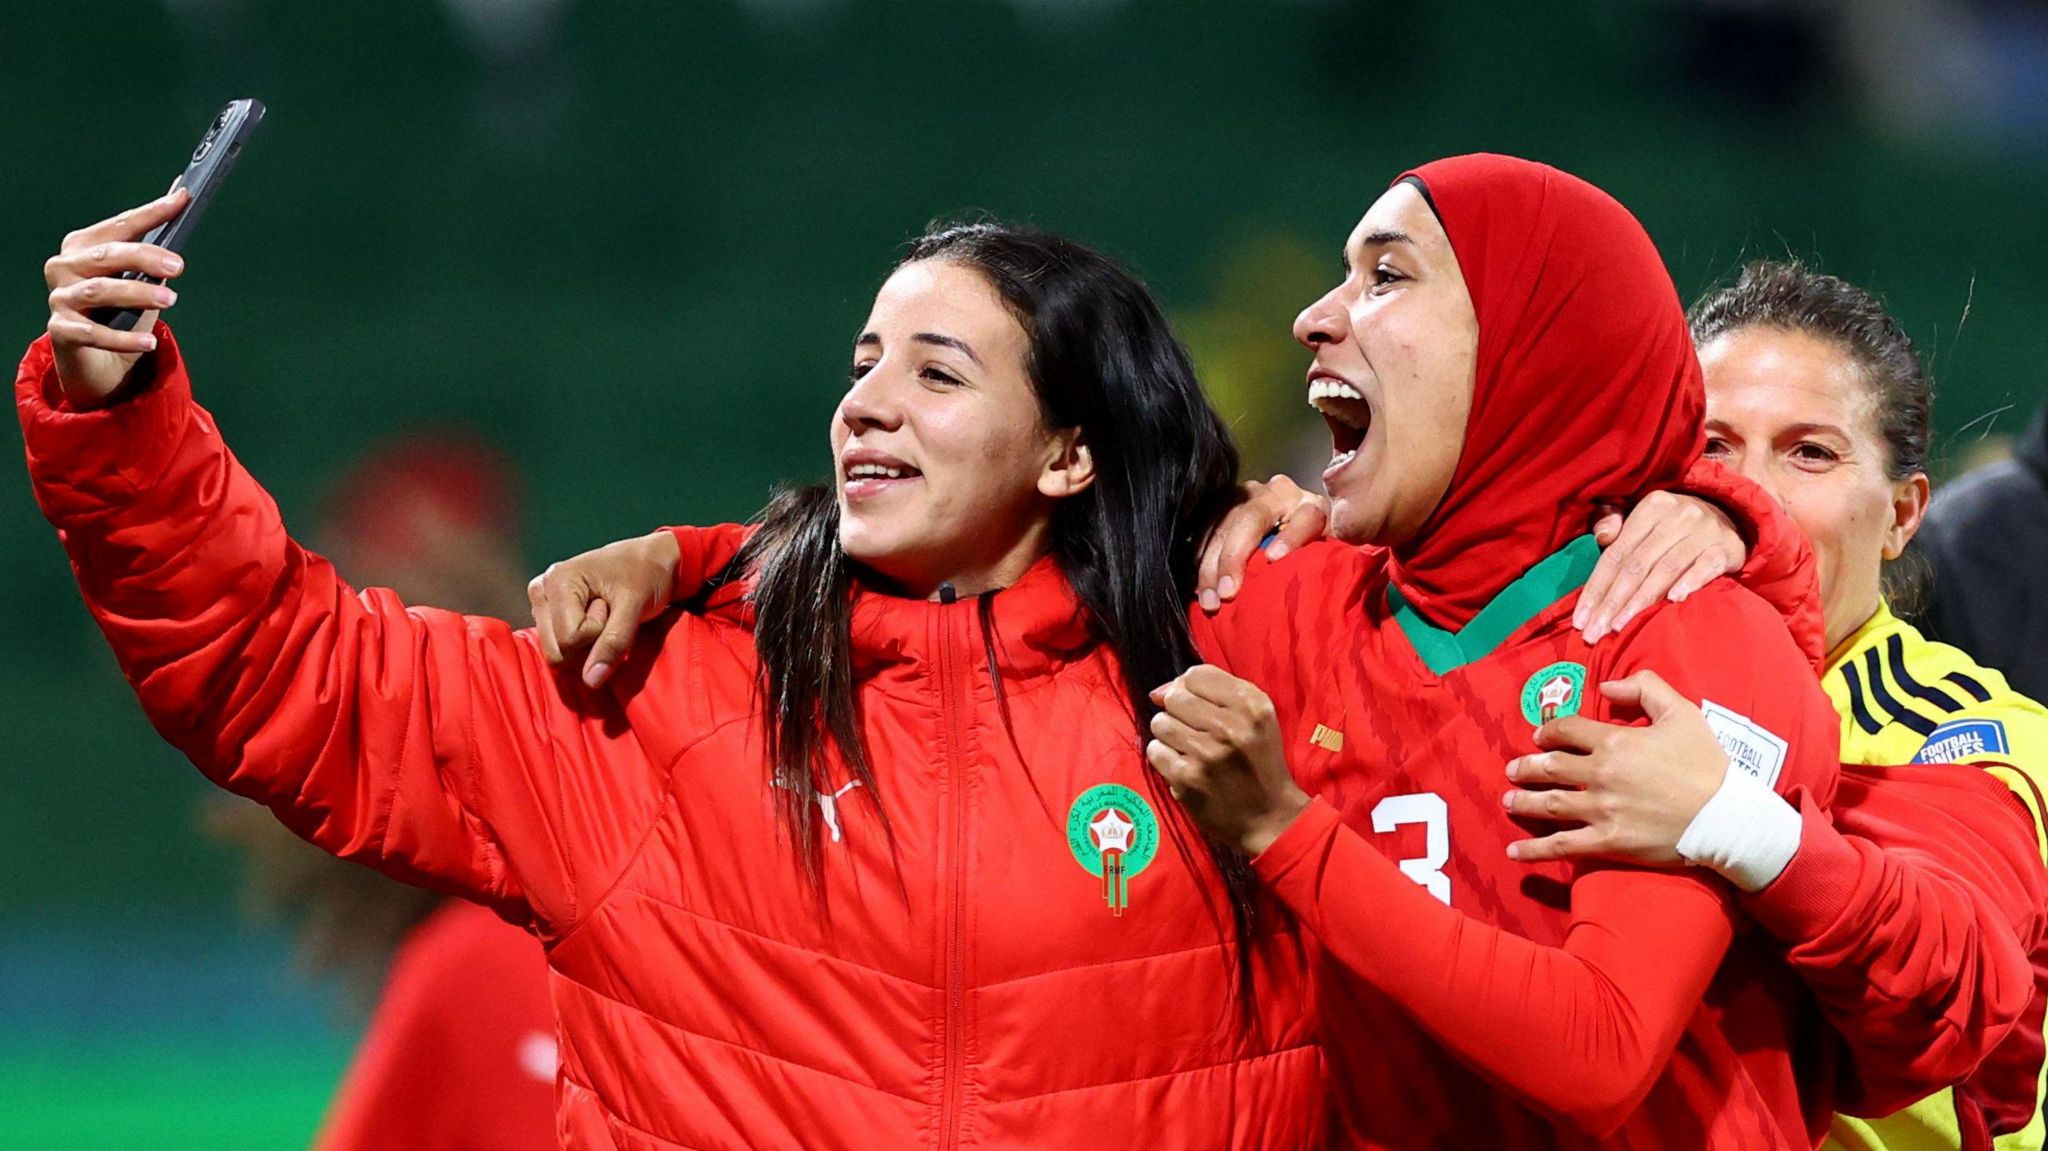 Morocco's Nouhaila Benzina celebrates after the match as Morocco qualify for the knockout stages of the World Cup